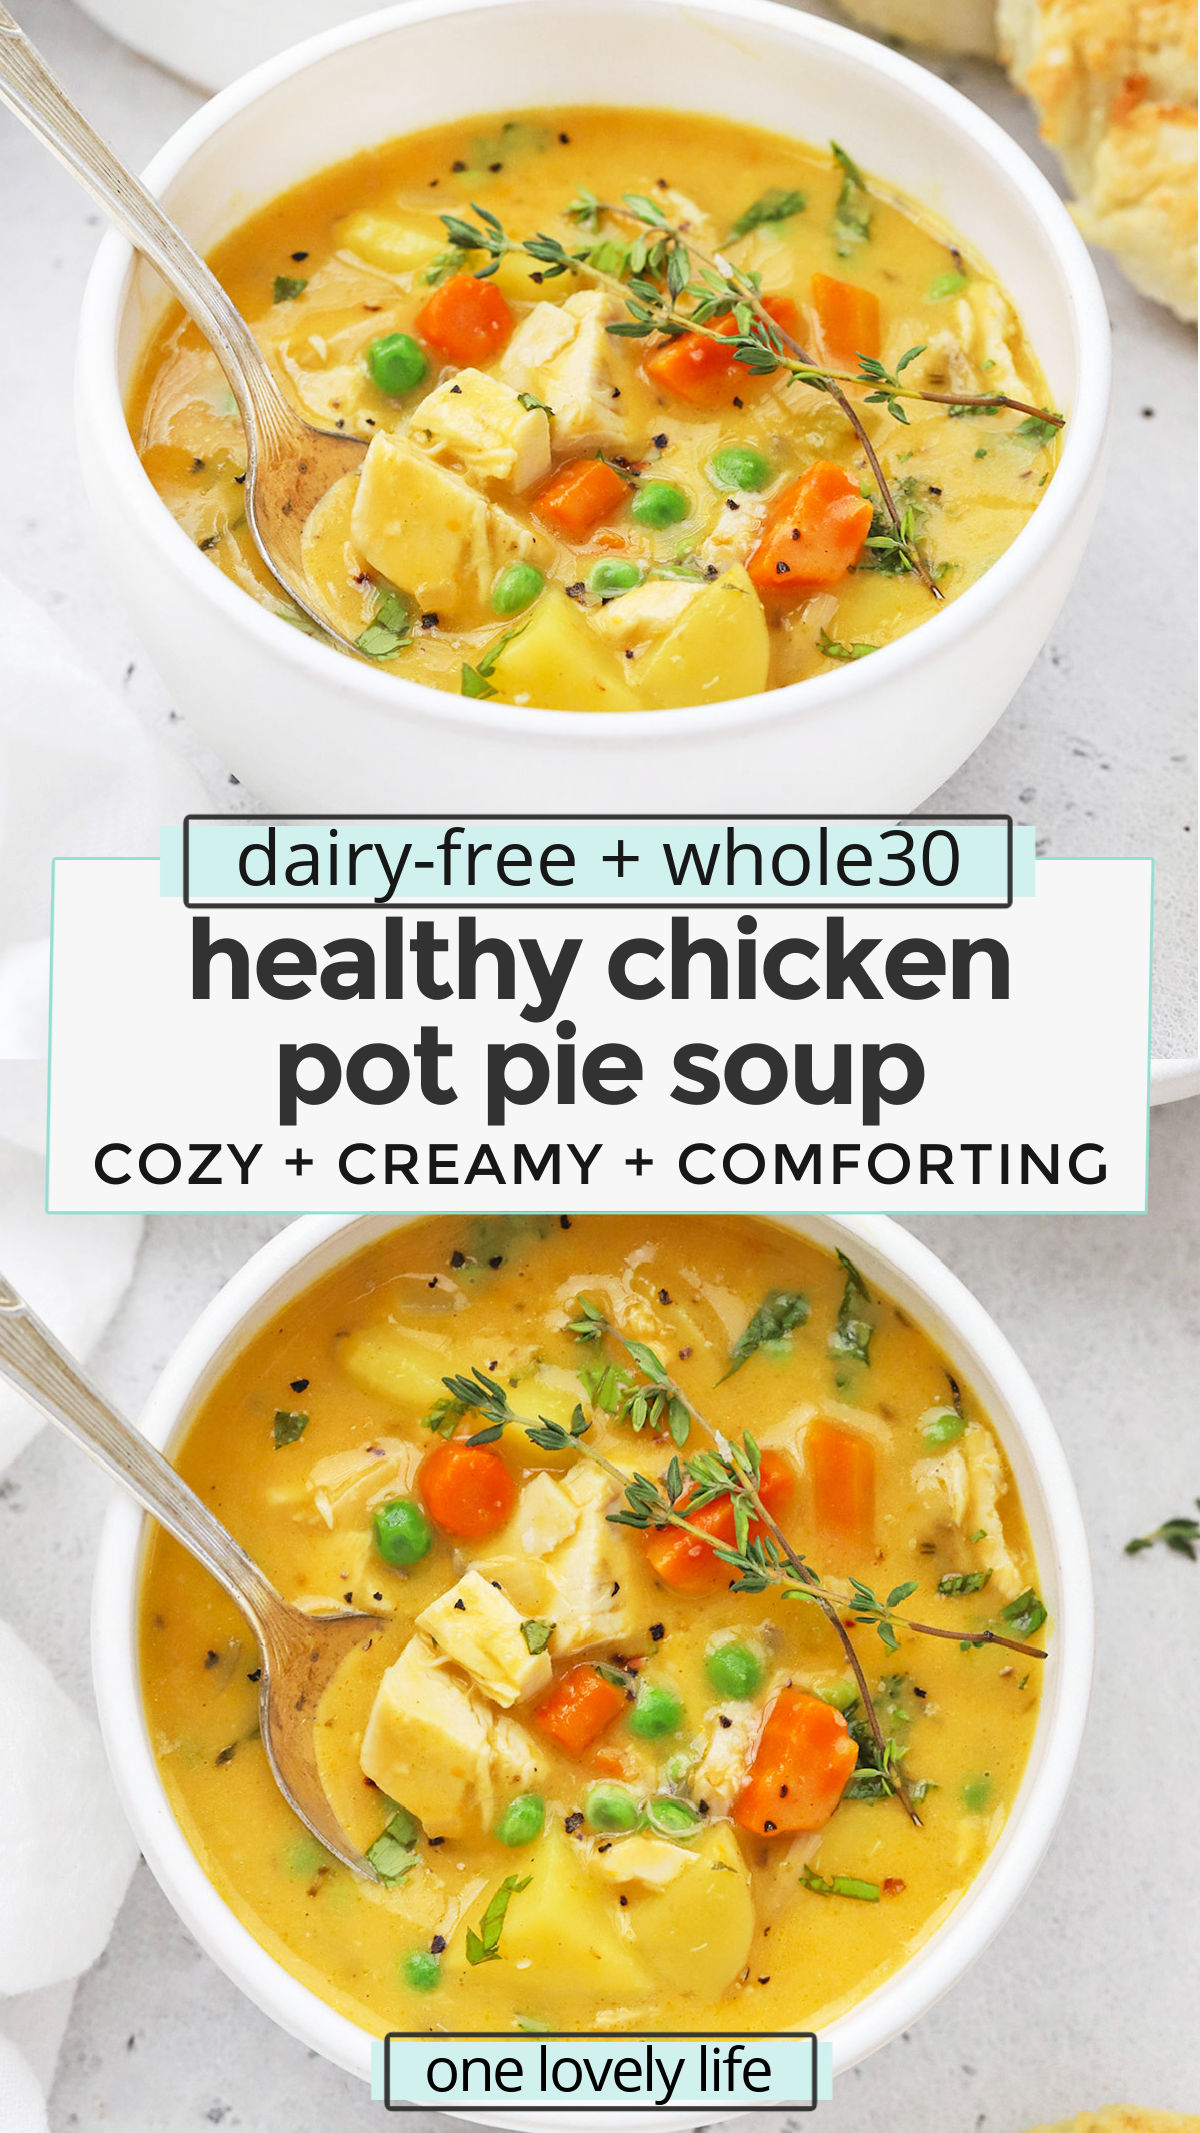 Healthy Chicken Pot Pie Soup - This dairy-free chicken pot pie soup is creamy, delicious, and cozy on a chilly day! (Whole30) // Whole30 Chicken Pot Pie Soup // Healthy Pot Pie Soup // Healthy Turkey Pot Pie Soup // Turkey Leftovers // Thanksgiving Leftovers // Dairy-Free turkey Pot Pie Soup // Whole30 Soup Recipe // Dairy-Free Soup Recipe // Healthy Soup Recipe #glutenfree #healthysoup #soup #thanksgiving #thanksgivingleftovers #turkey #chickenpotpie #whole30 #dairyfree